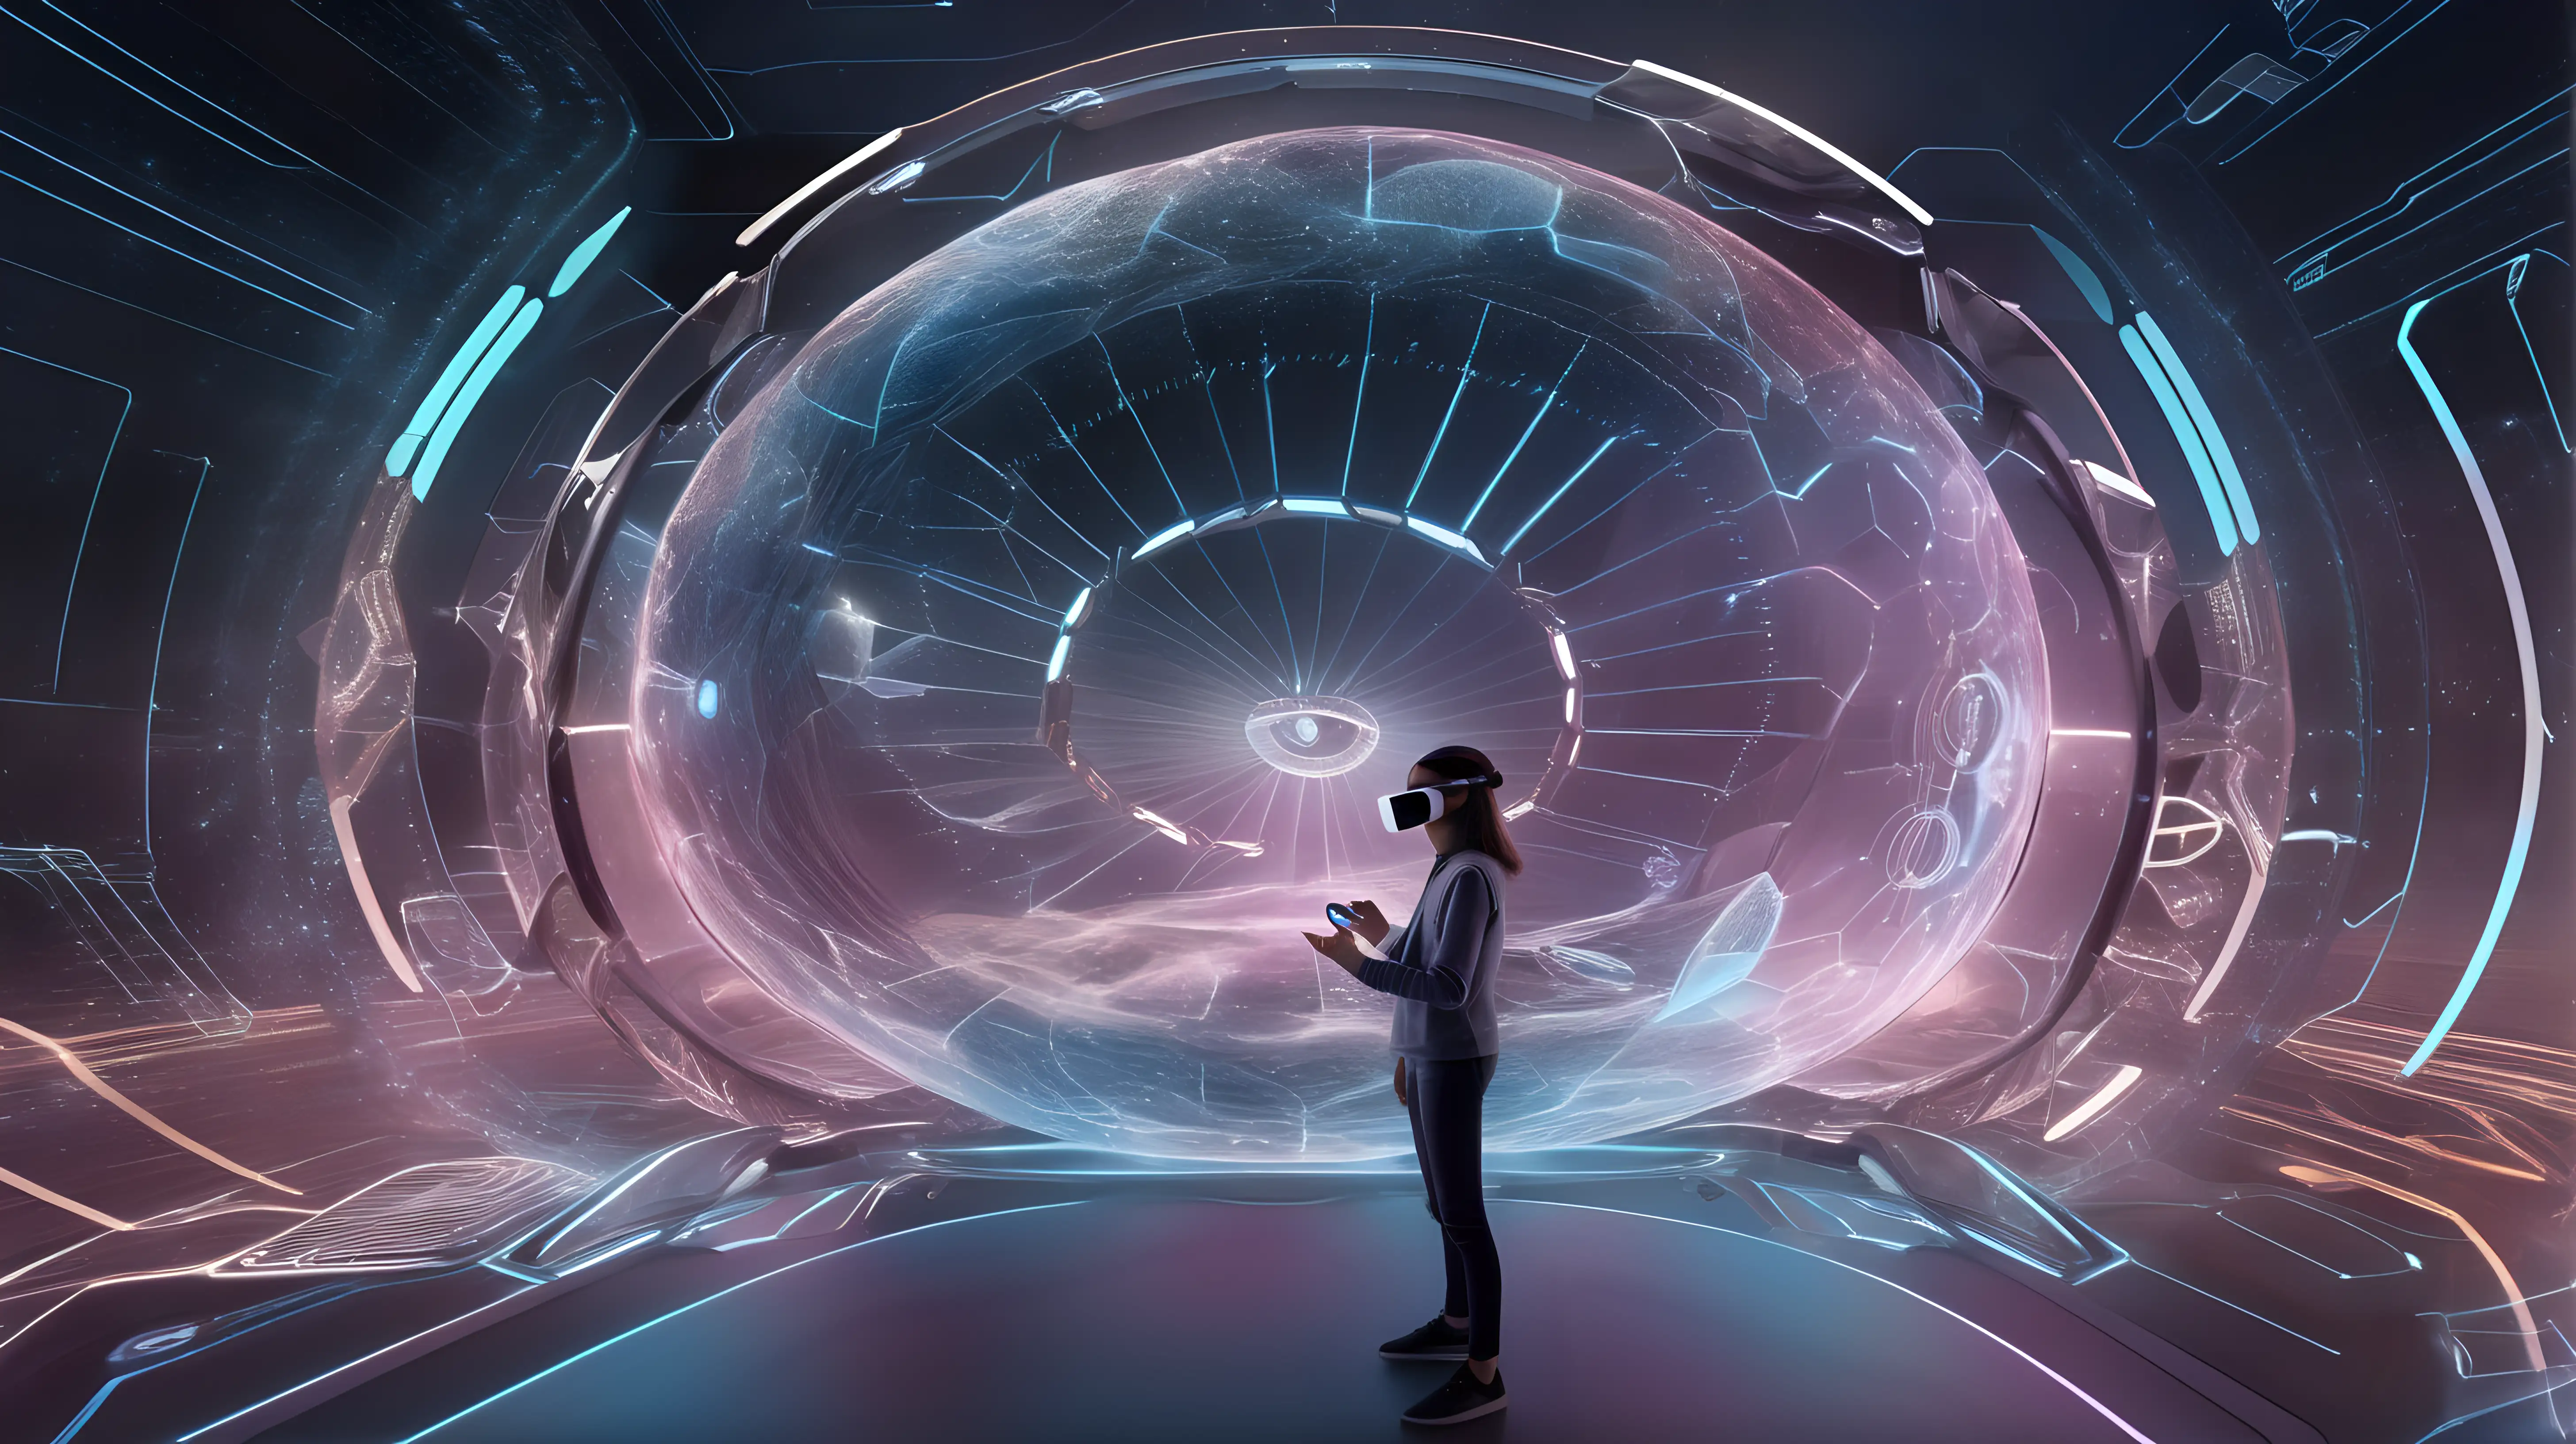 Design a futuristic virtual reality interface with Abstract Time Warps as a background, giving users a sense of being immersed in a time-bending digital environment.